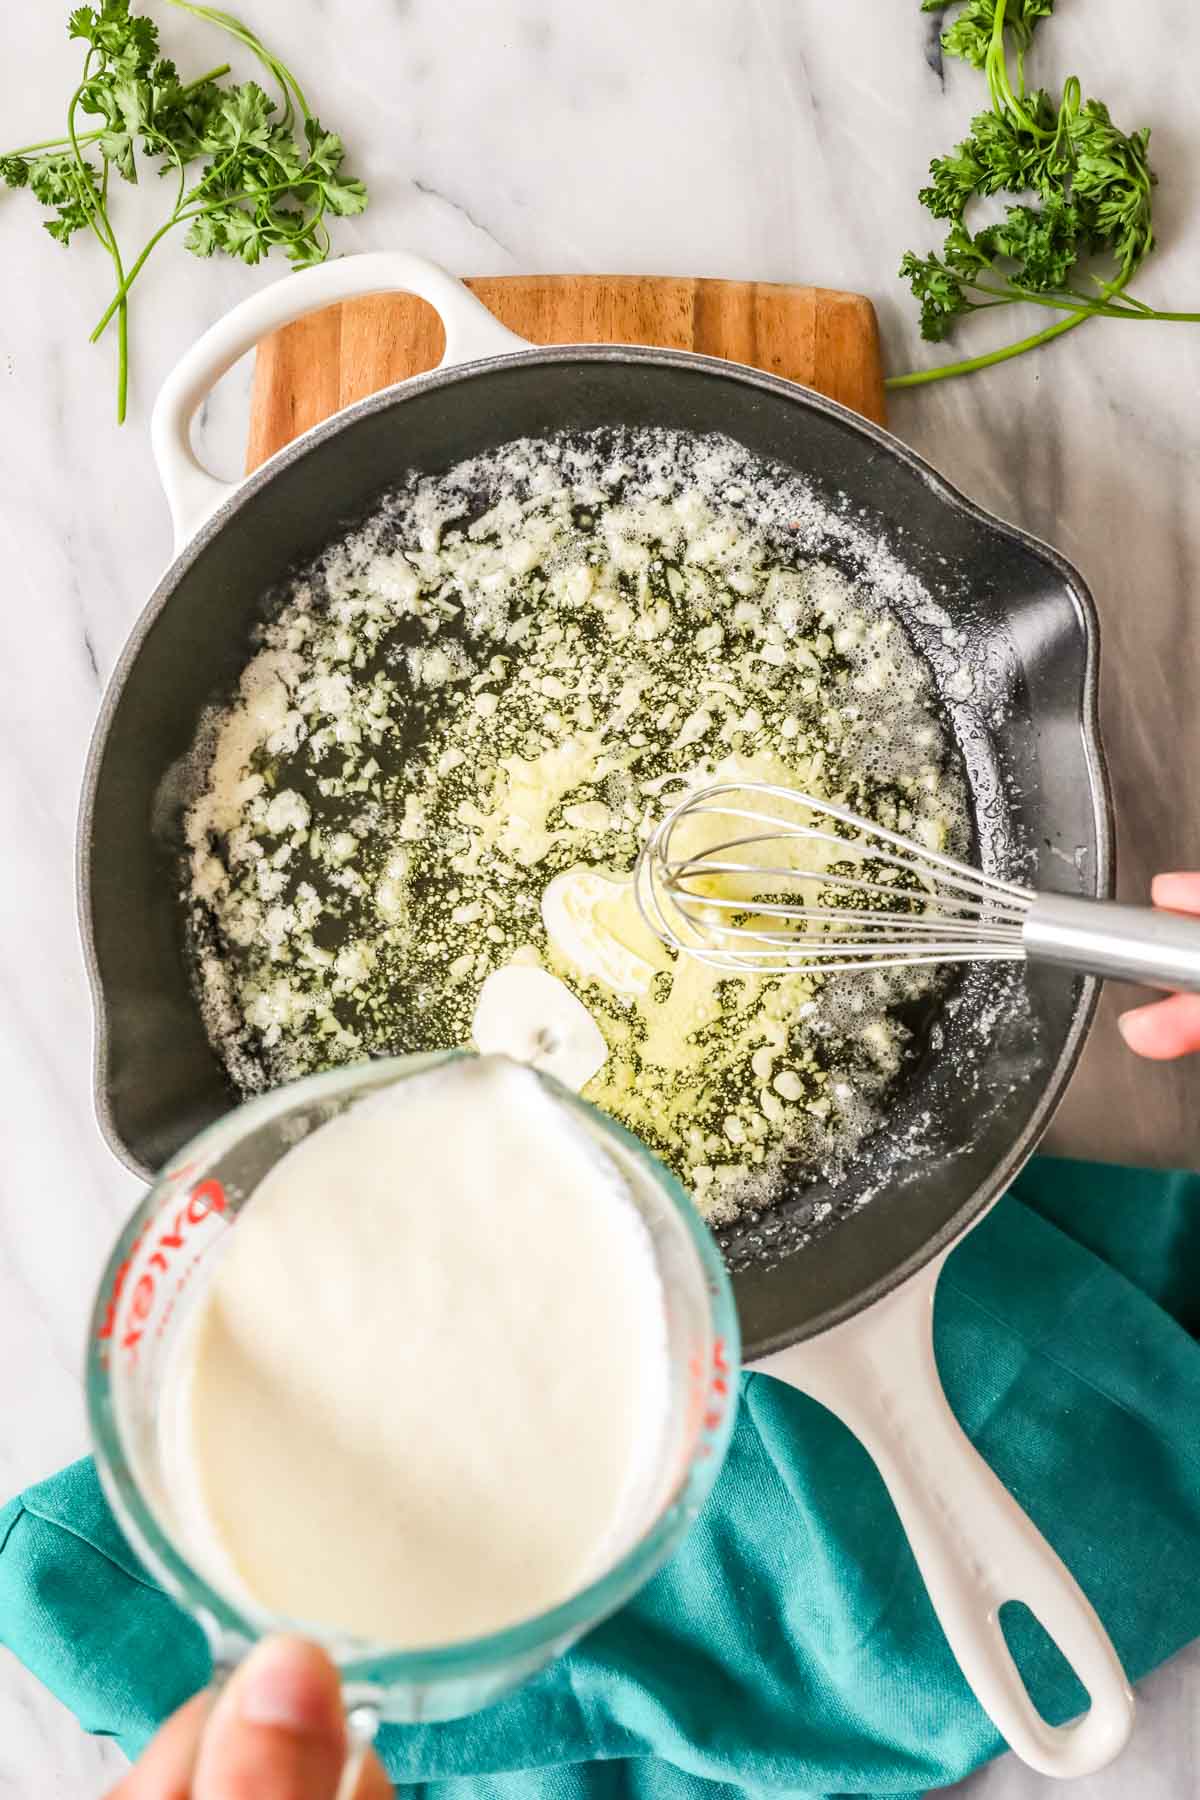 Cream being whisked into a pan of melted butter and garlic.